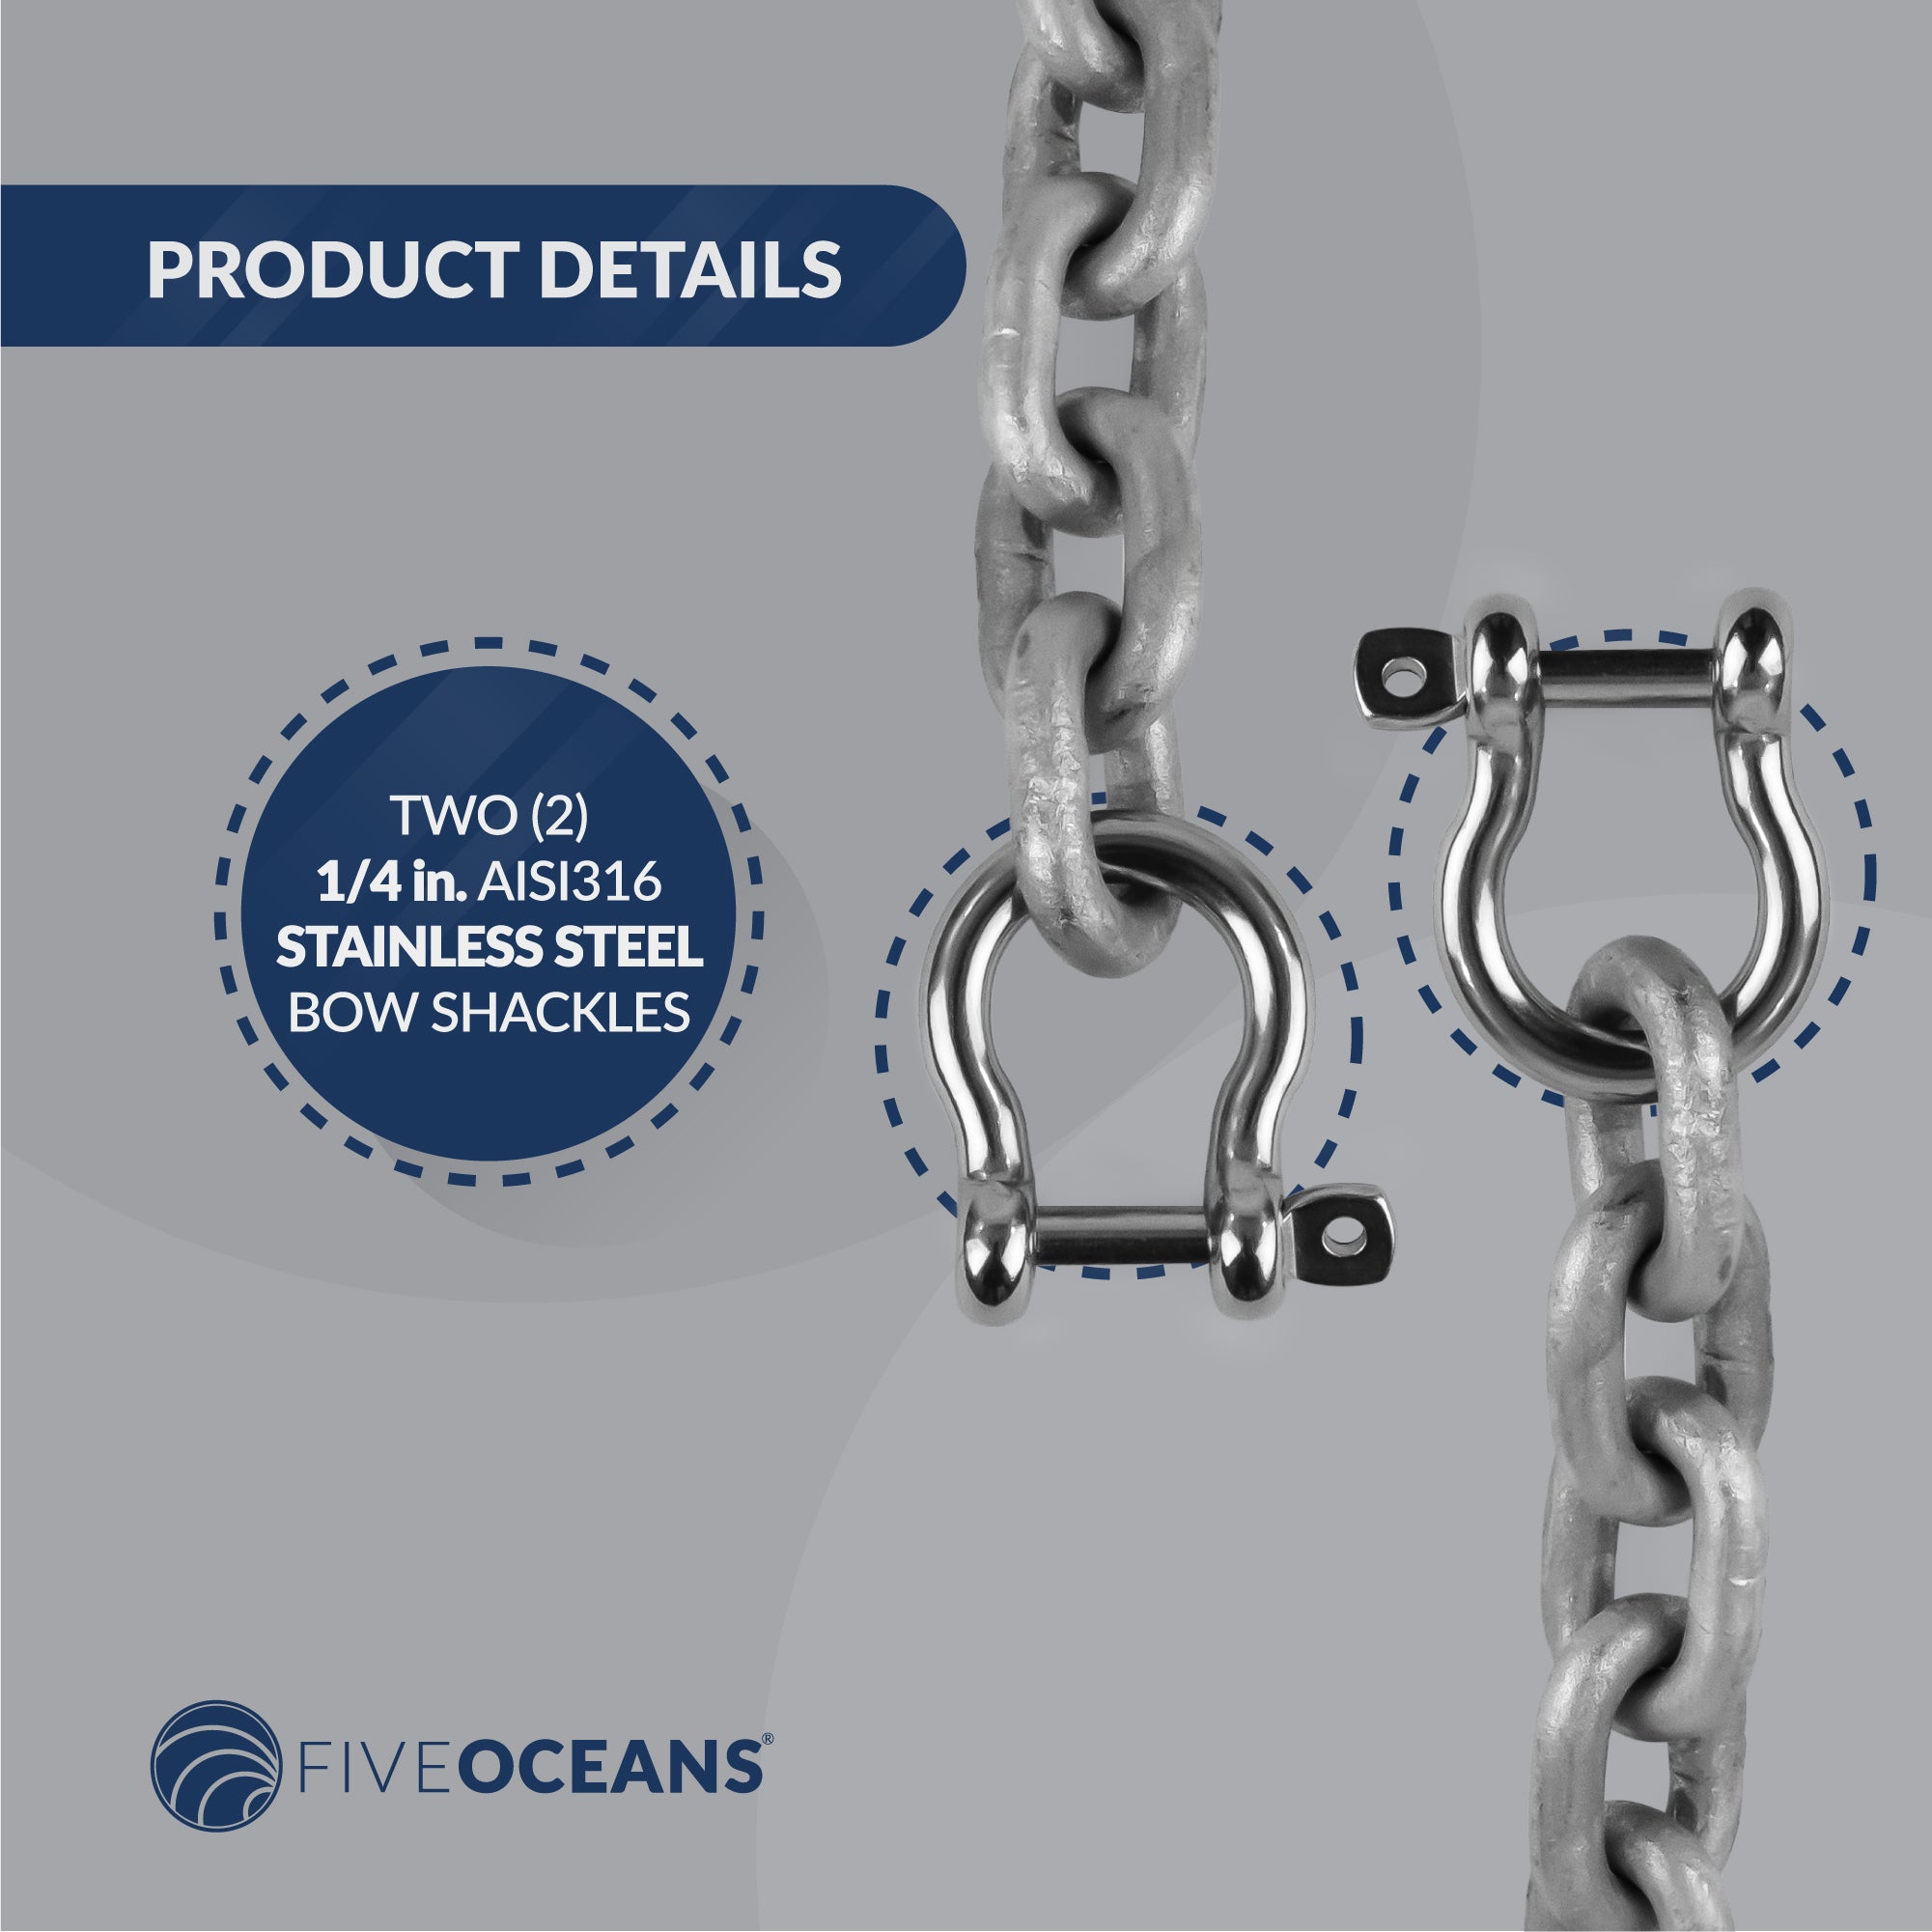 Boat Anchor Lead Chain with Shackles,  1/4" x 5', HTG4 Galvanized Steel - FO4489-G5